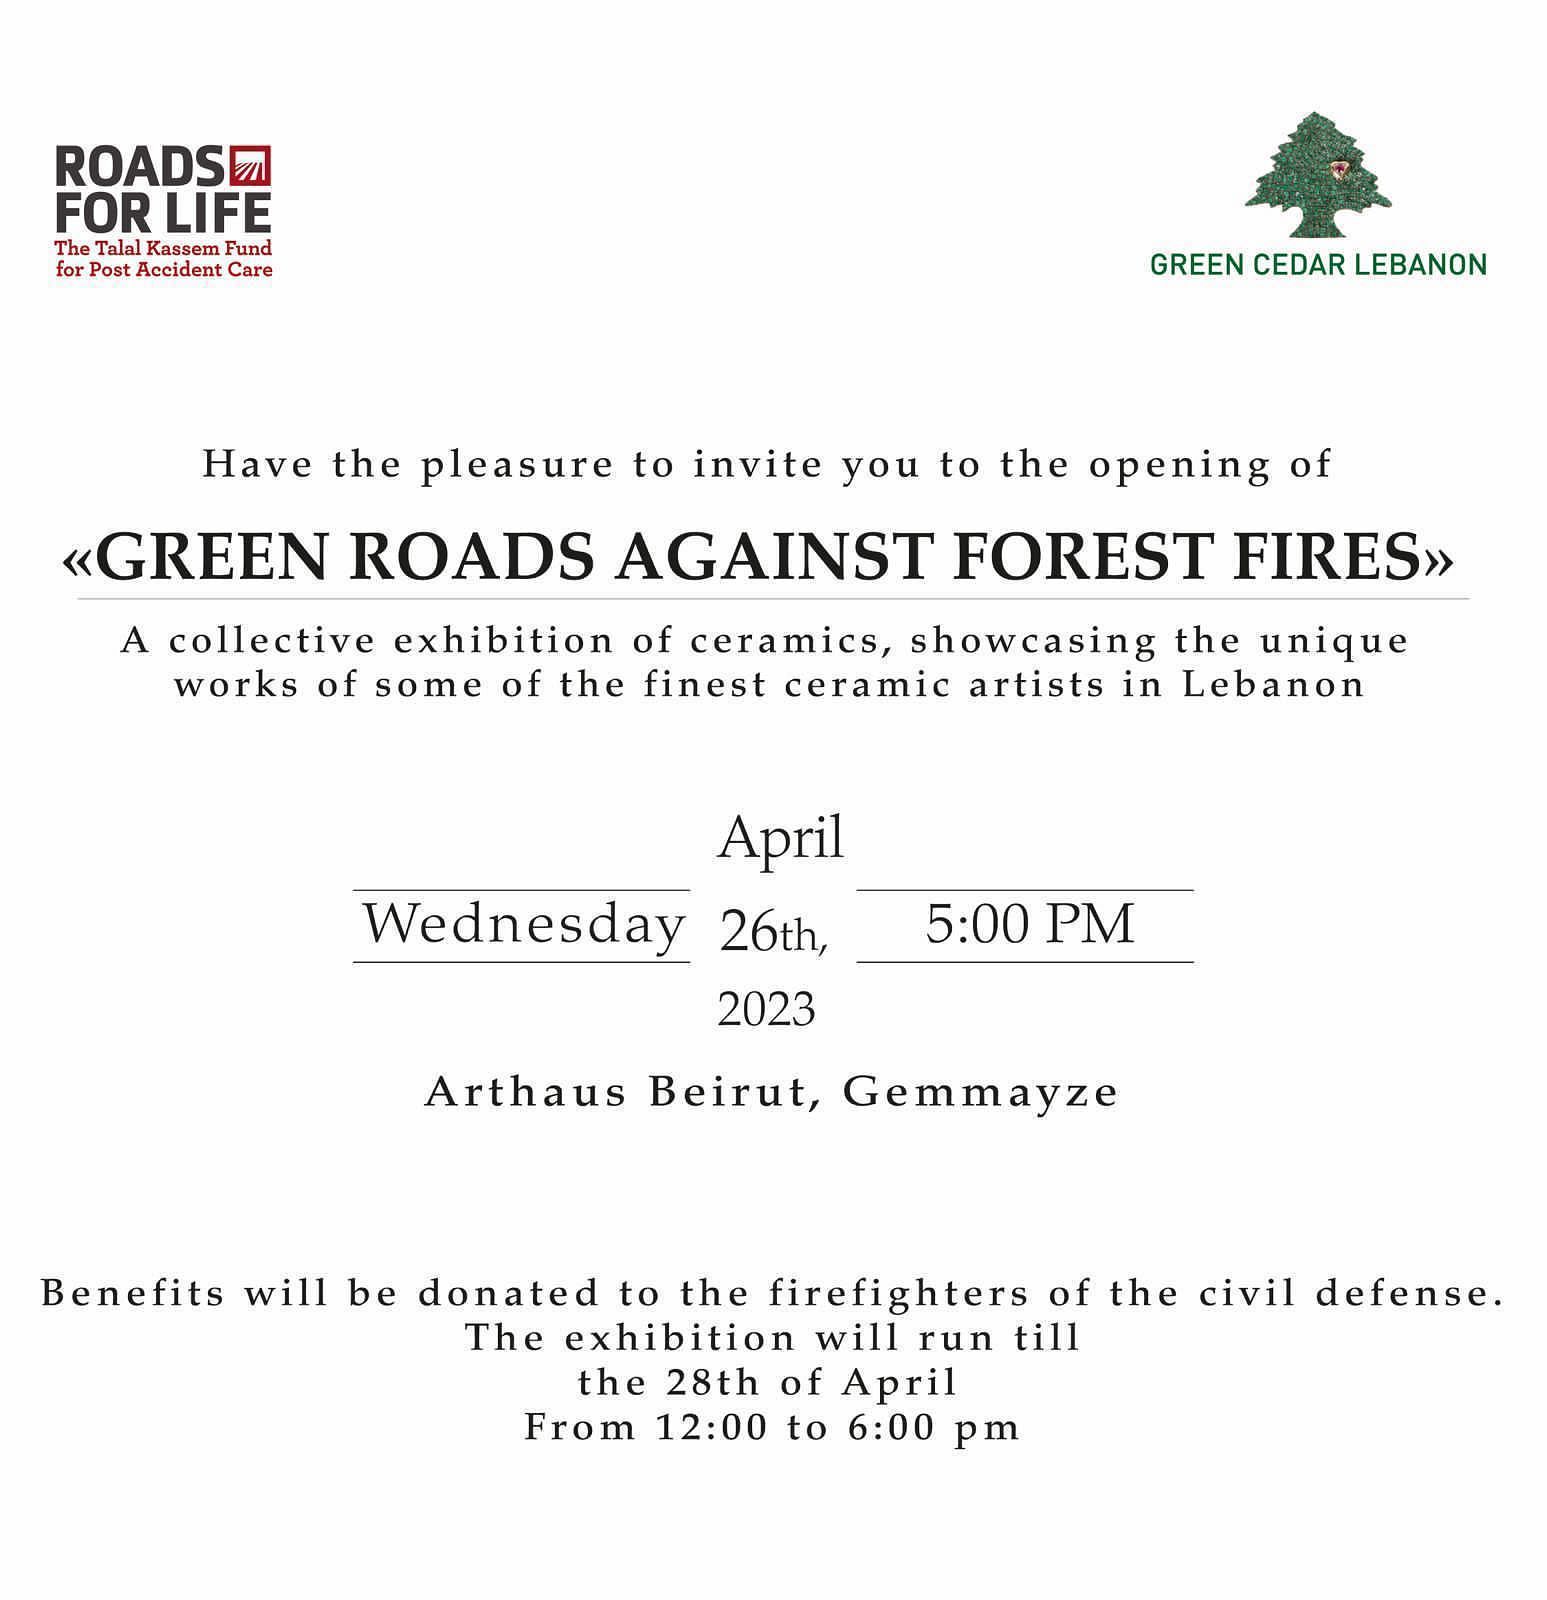 GREEN ROADS AGAINST FOREST FIRES thumbnail